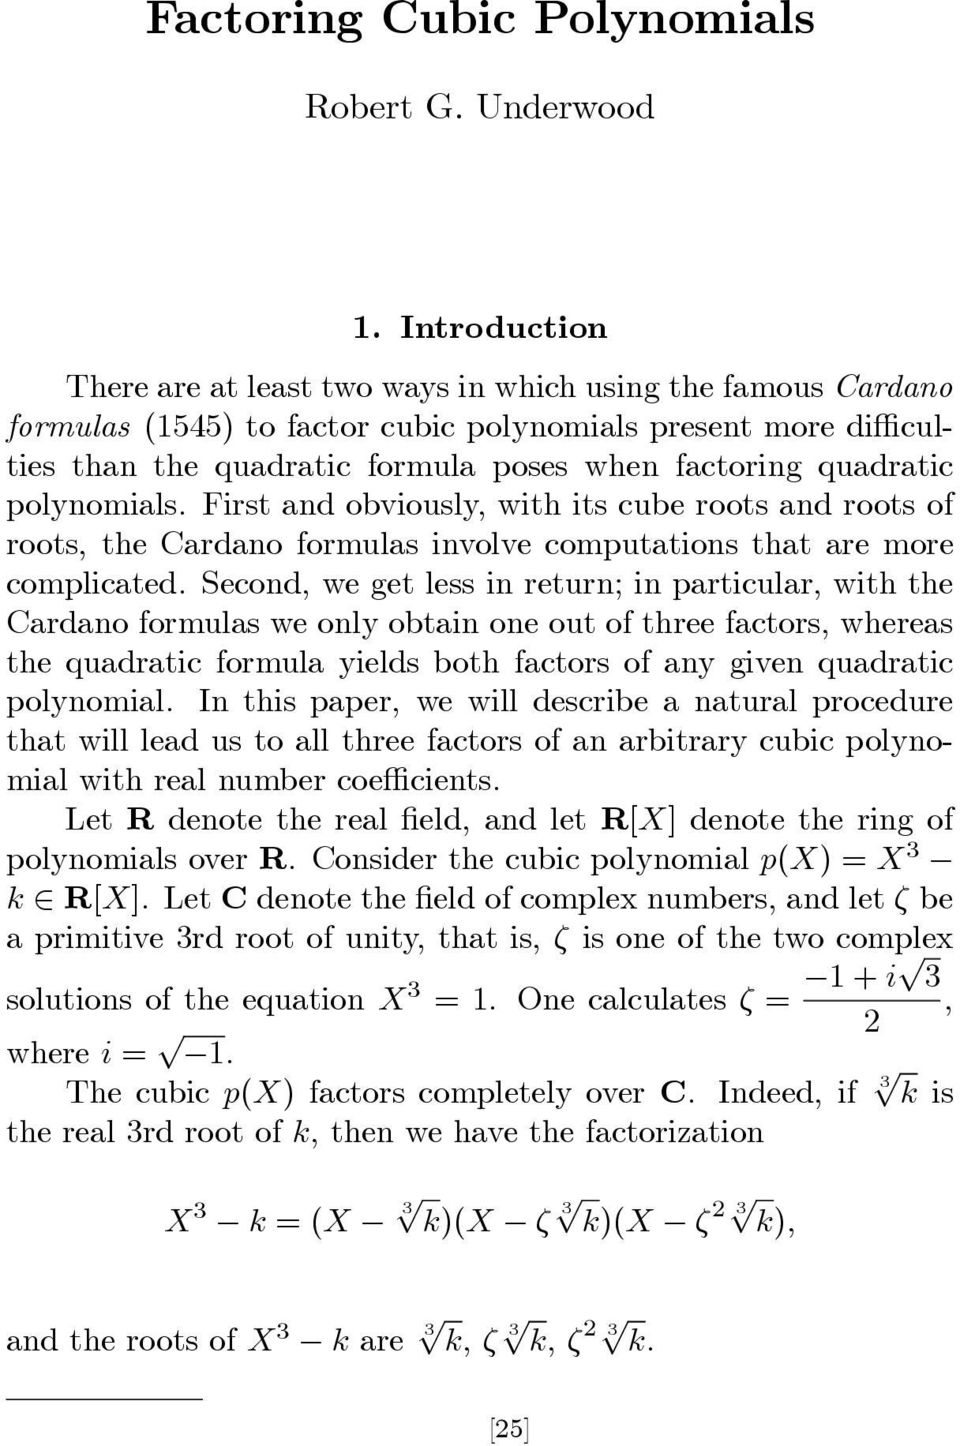 quadratic polynomials. First and obviously, with its cube roots and roots of roots, the Cardano formulas involve computations that are more complicated.